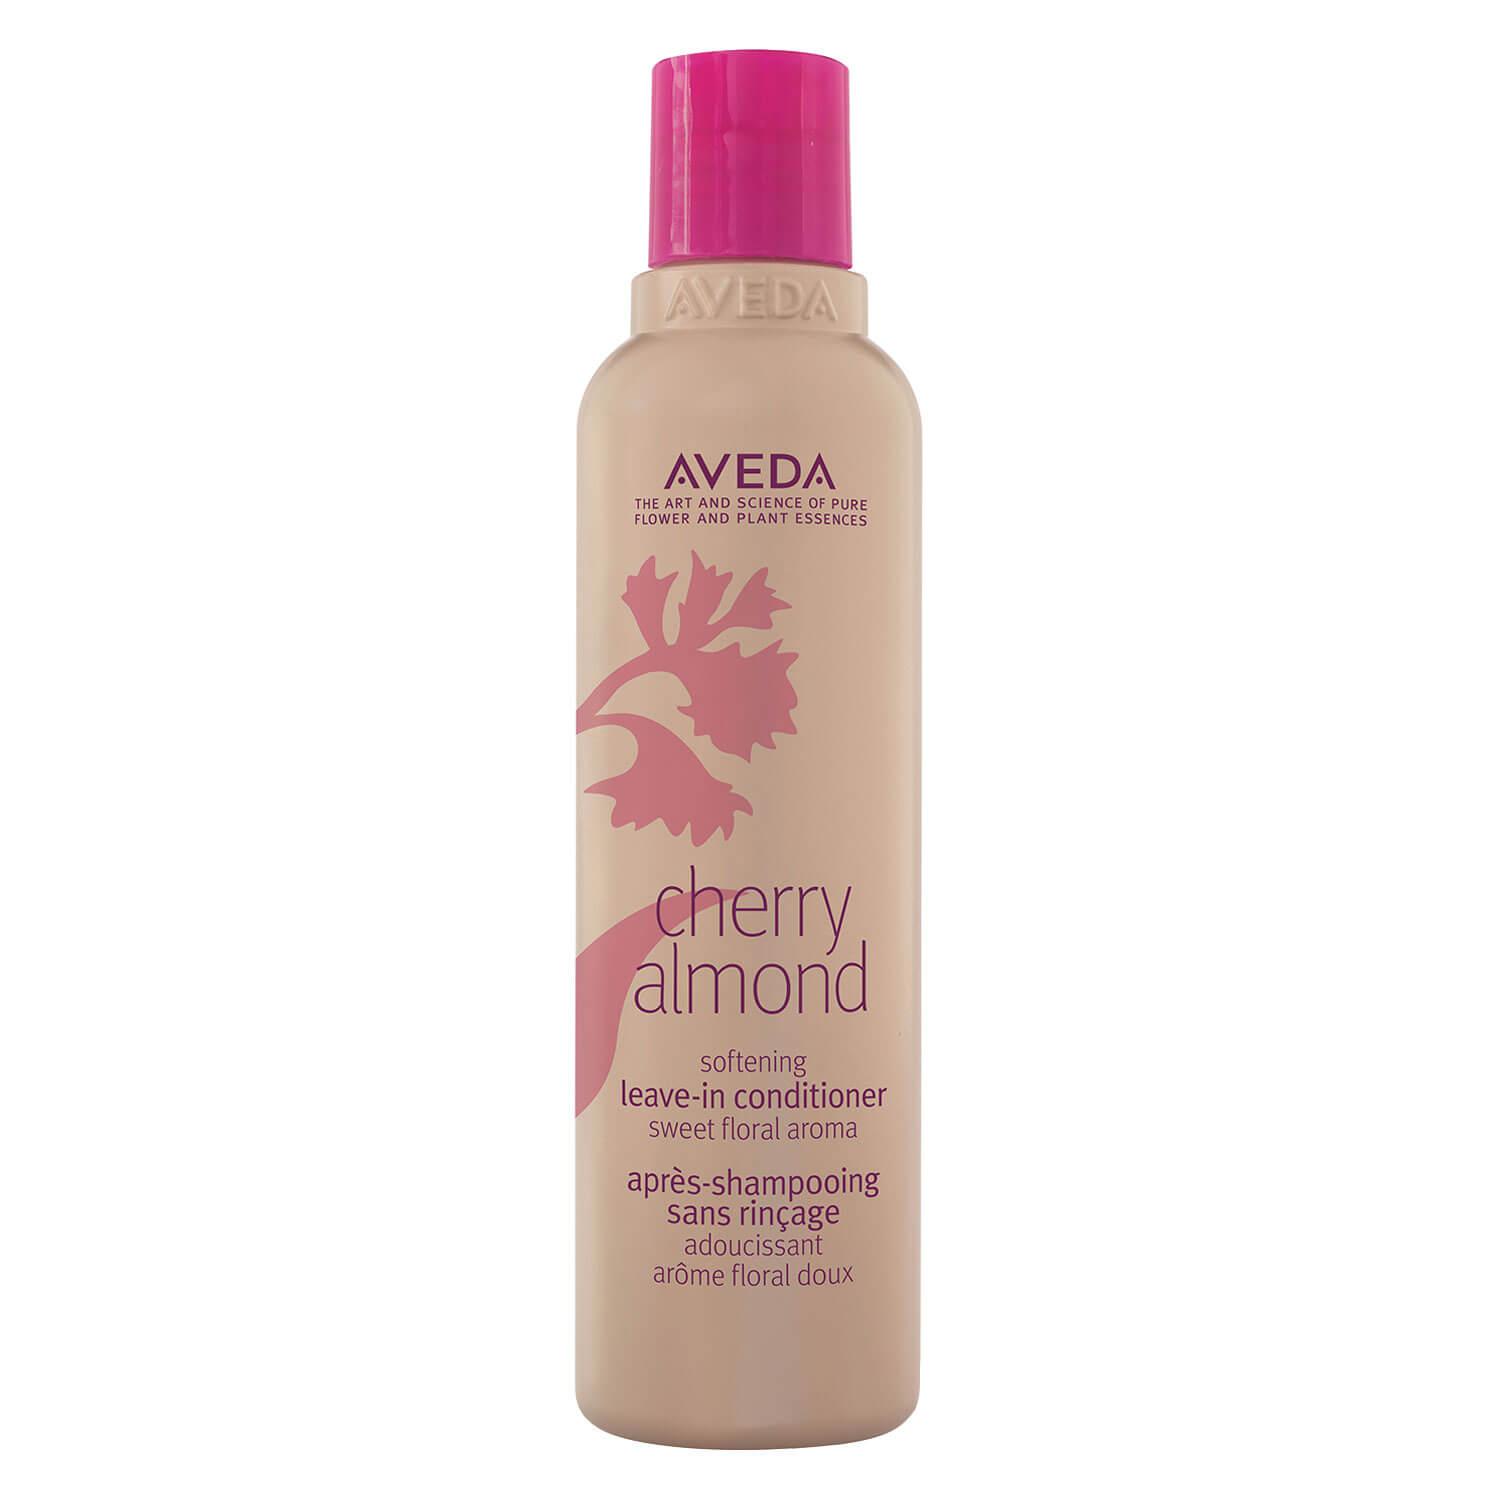 cherry almond - leave-in conditioner